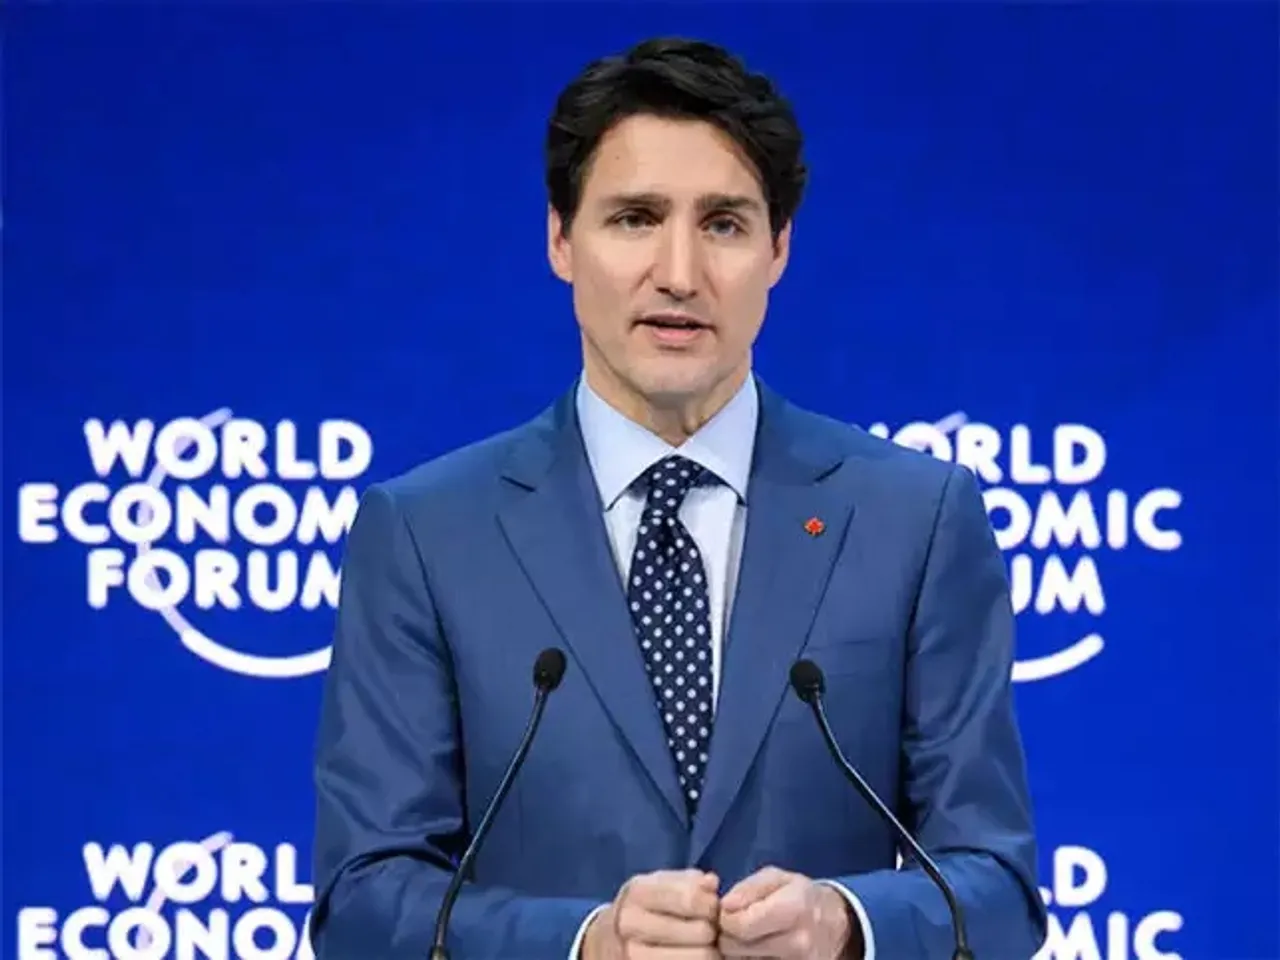 WEF 2018: Trudeau bats for gender equality, says sexual harassment unacceptable